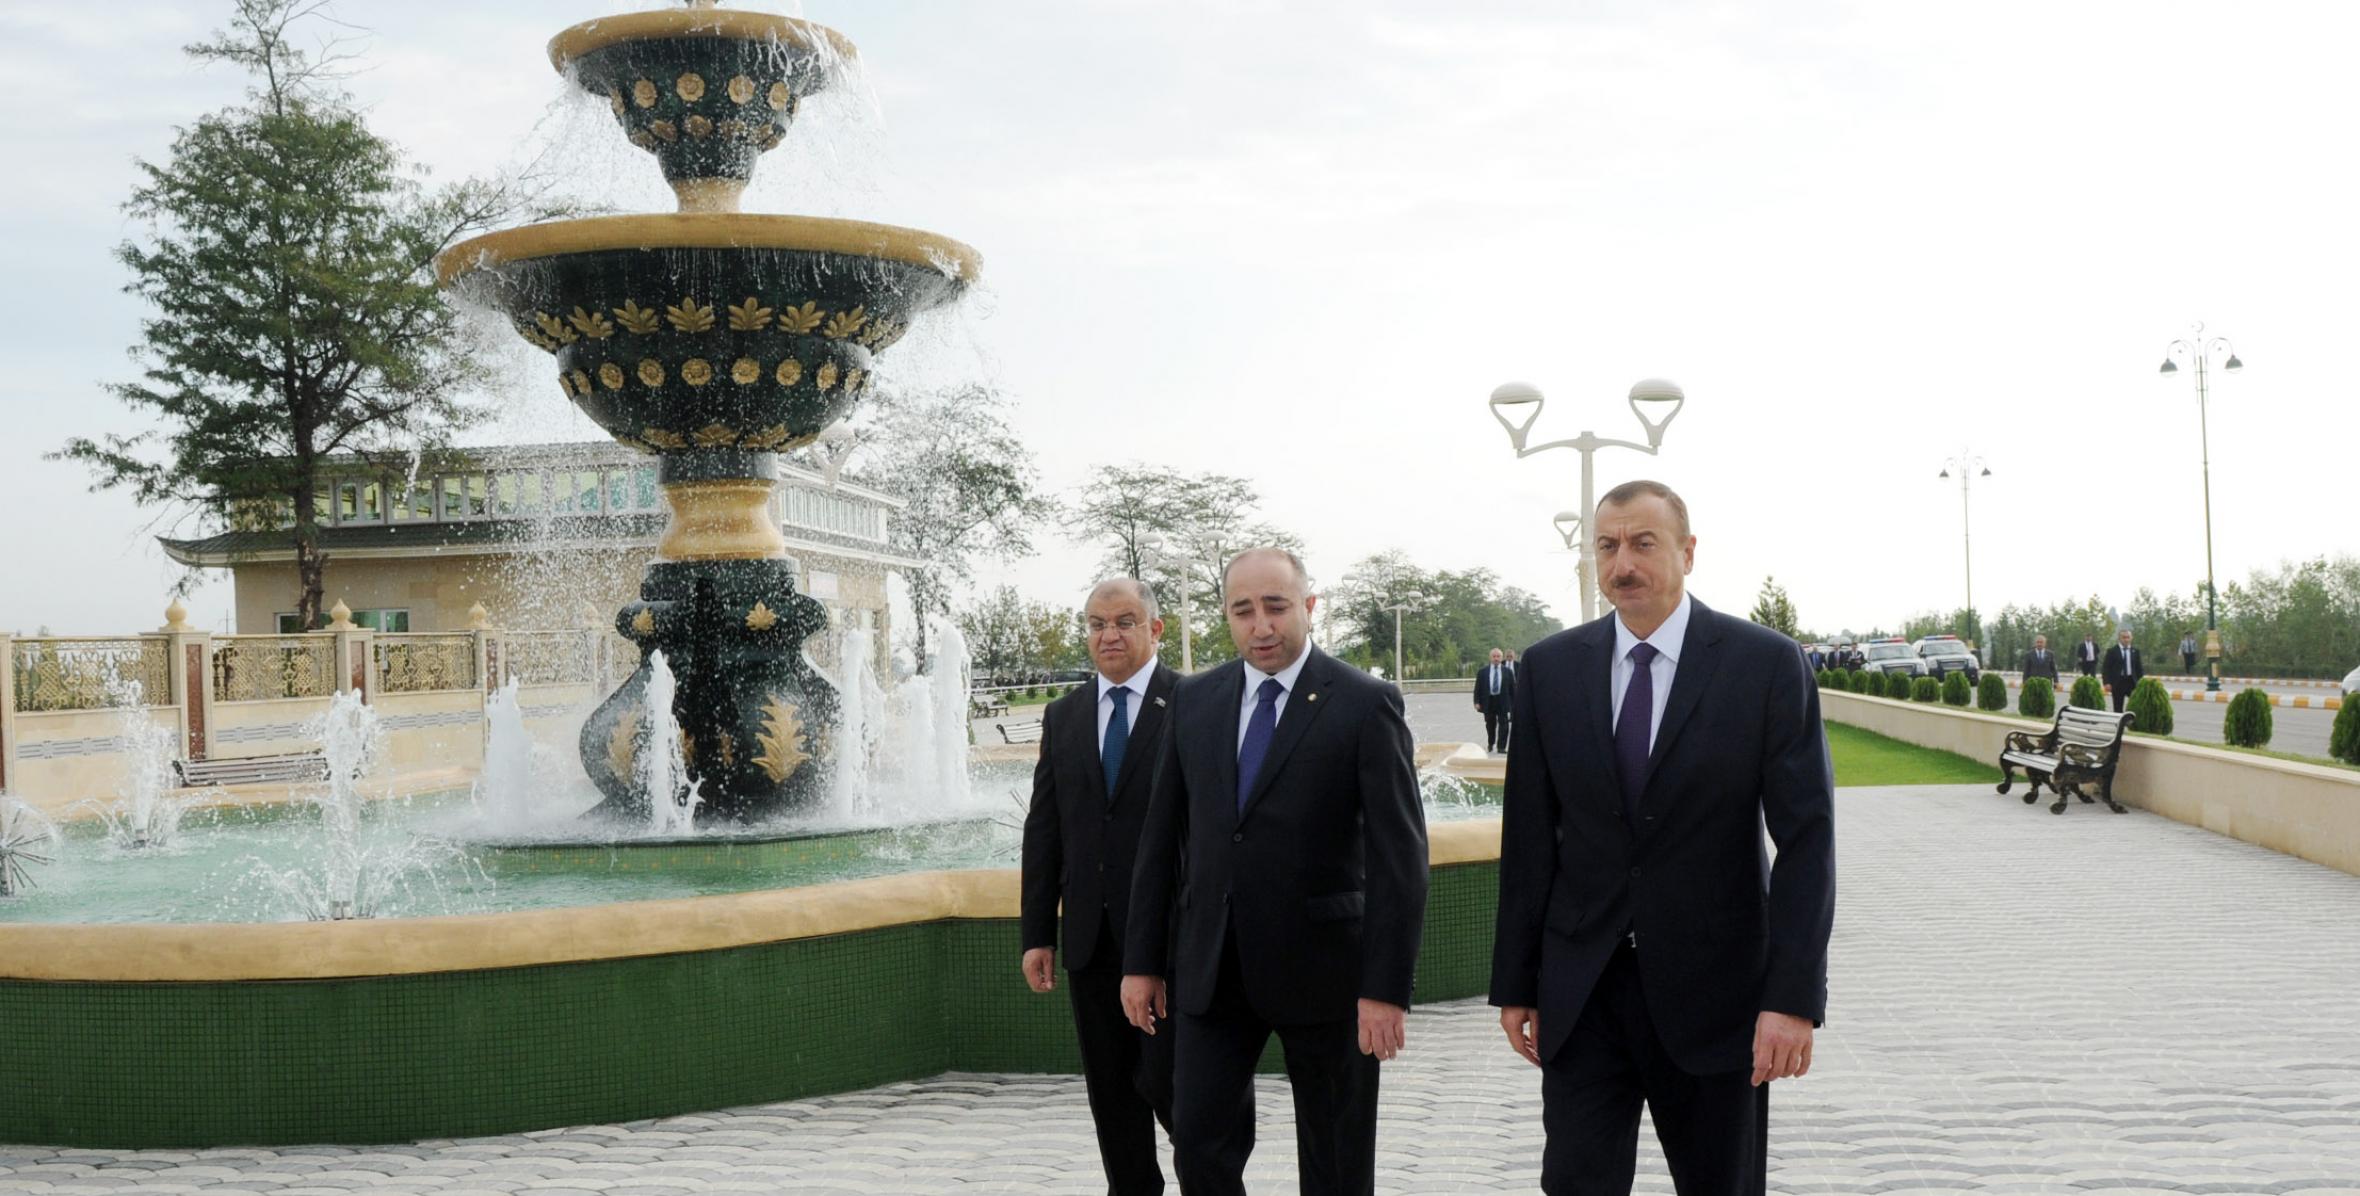 Ilham Aliyev reviewed the Flag square in Tartar